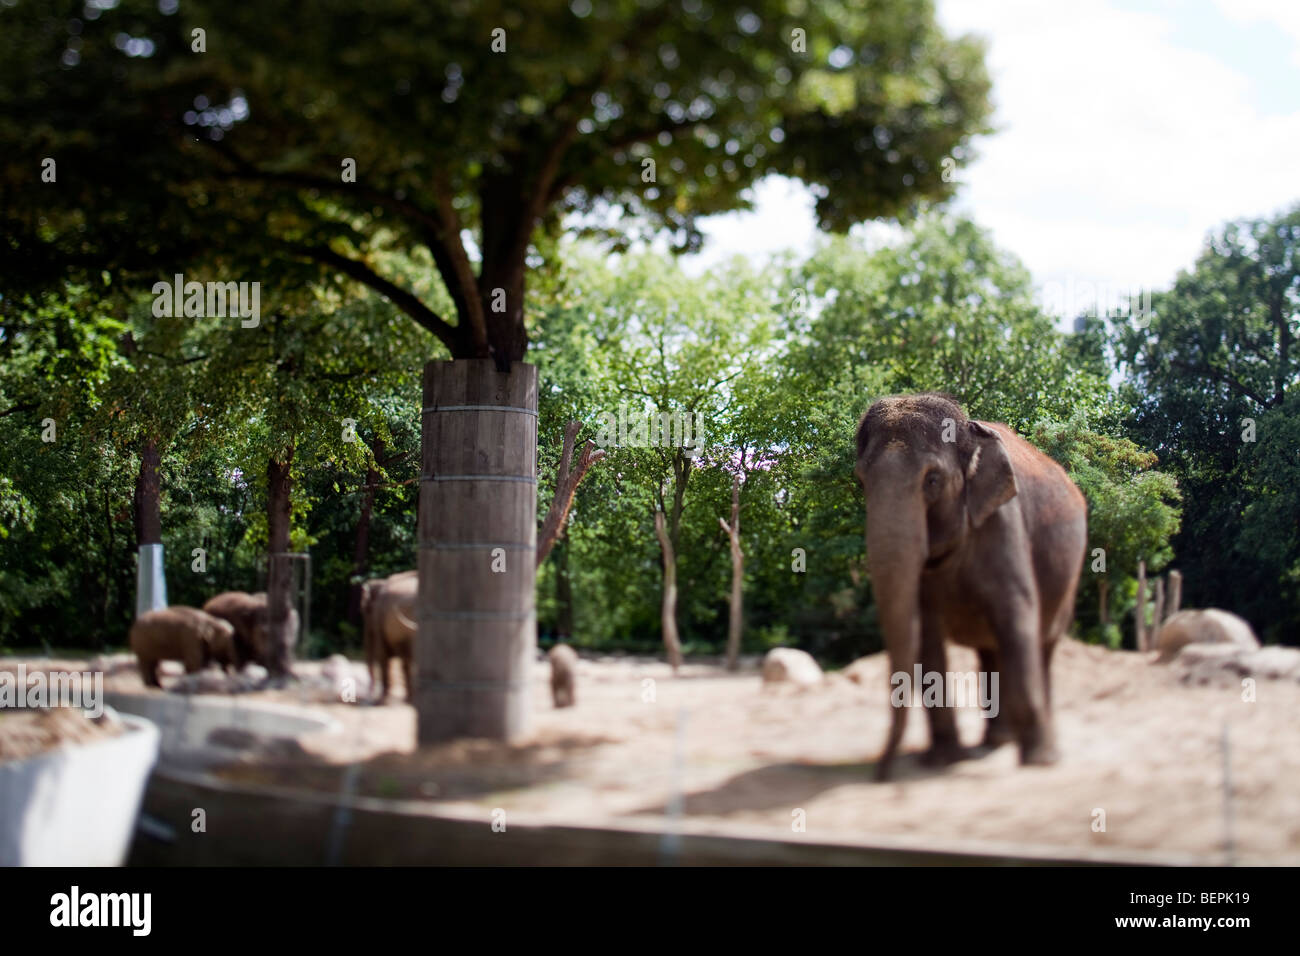 Asian elephants on Berlin zoo, Germany. Tilted lens used for shallow depth of field. Stock Photo